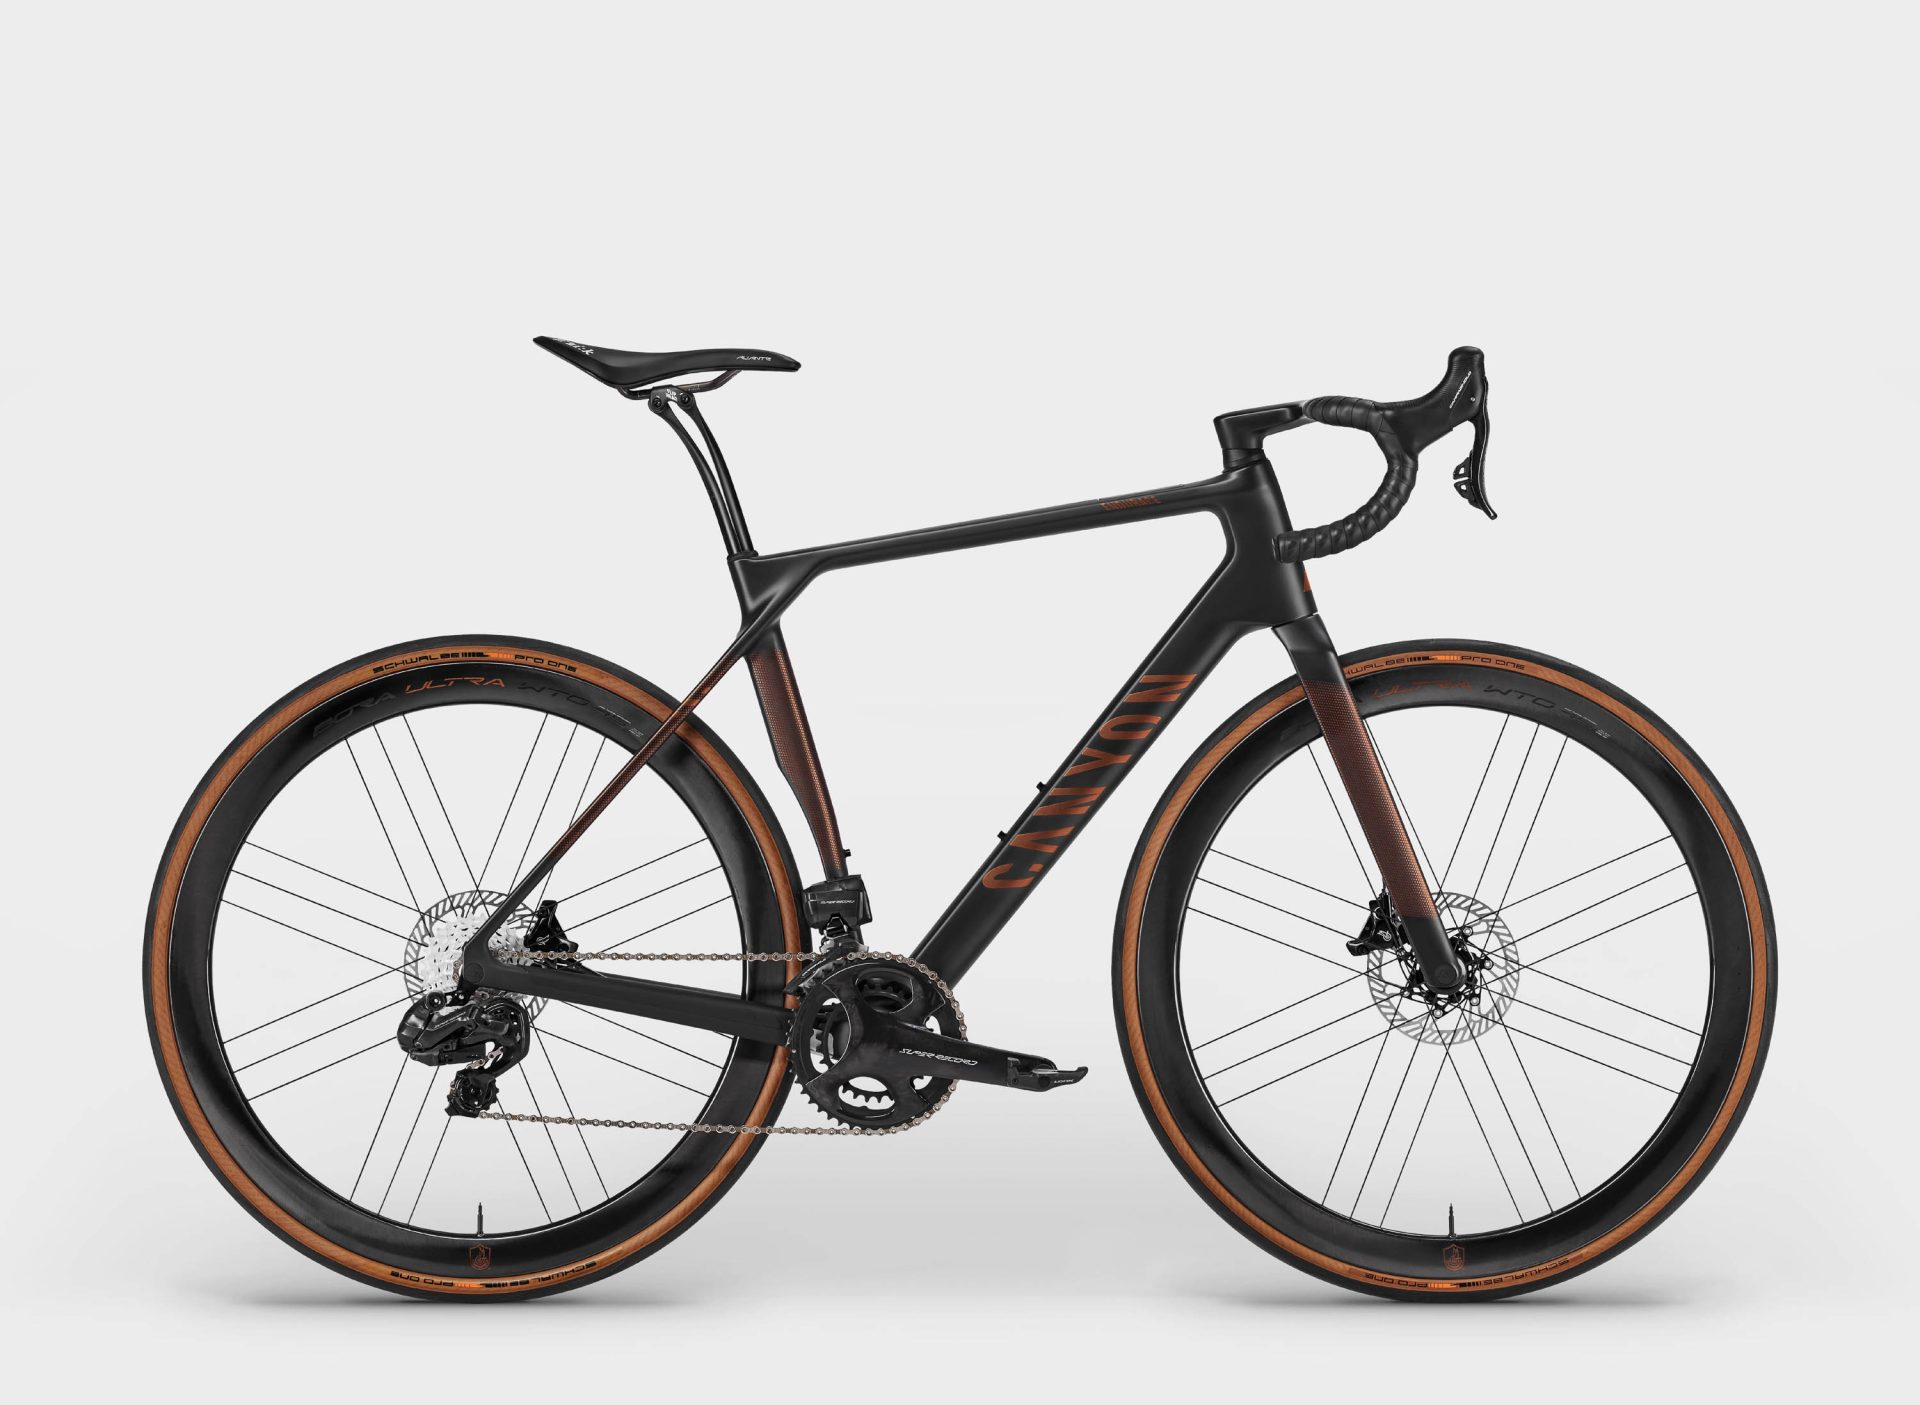 The 2024 Canyon Endurace CFR WRL comes with a Campagnolo Super Record WRL wireless electronic groupset and Campagnolo Bora Ultra WTO carbon wheels. Sorry, no power meter on this one, folks.  Claimed weight is 7.2 kg (15.87 lb), and retail price is US$n/a / £9,500 / €10,000. 